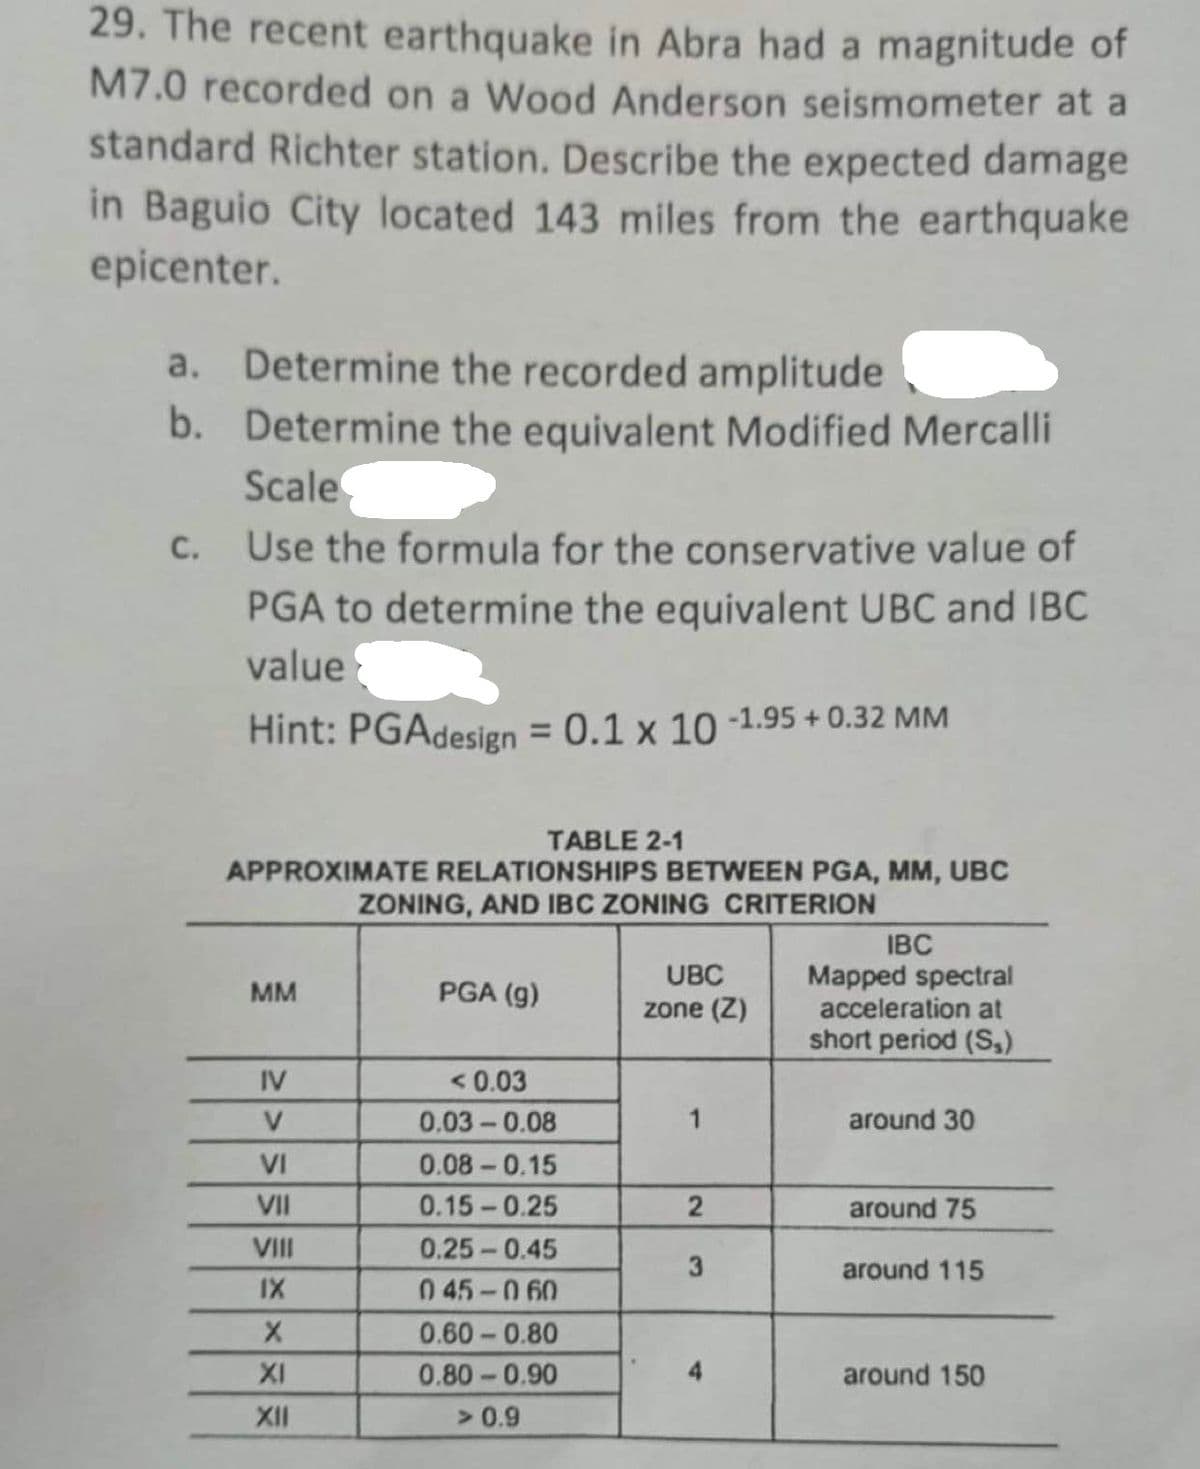 29. The recent earthquake in Abra had a magnitude of
M7.0 recorded on a Wood Anderson seismometer at a
standard Richter station. Describe the expected damage
in Baguio City located 143 miles from the earthquake
epicenter.
a. Determine the recorded amplitude
b.
Determine the equivalent Modified Mercalli
Scale
Use the formula for the conservative value of
PGA to determine the equivalent UBC and IBC
value
Hint: PGAdesign = 0.1 x 10 -1.95 + 0.32 MM
C.
TABLE 2-1
APPROXIMATE RELATIONSHIPS BETWEEN PGA, MM, UBC
ZONING, AND IBC ZONING CRITERION
MM
IV
V
VI
VII
VIII
IX
X
XI
XII
PGA (g)
<0.03
0.03-0.08
0.08-0.15
0.15-0.25
0.25-0.45
045-060
0.60-0.80
0.80 -0.90
> 0.9
UBC
zone (Z)
1
2
3
4
IBC
Mapped spectral
acceleration at
short period (S₁)
around 30
around 75
around 115
around 150